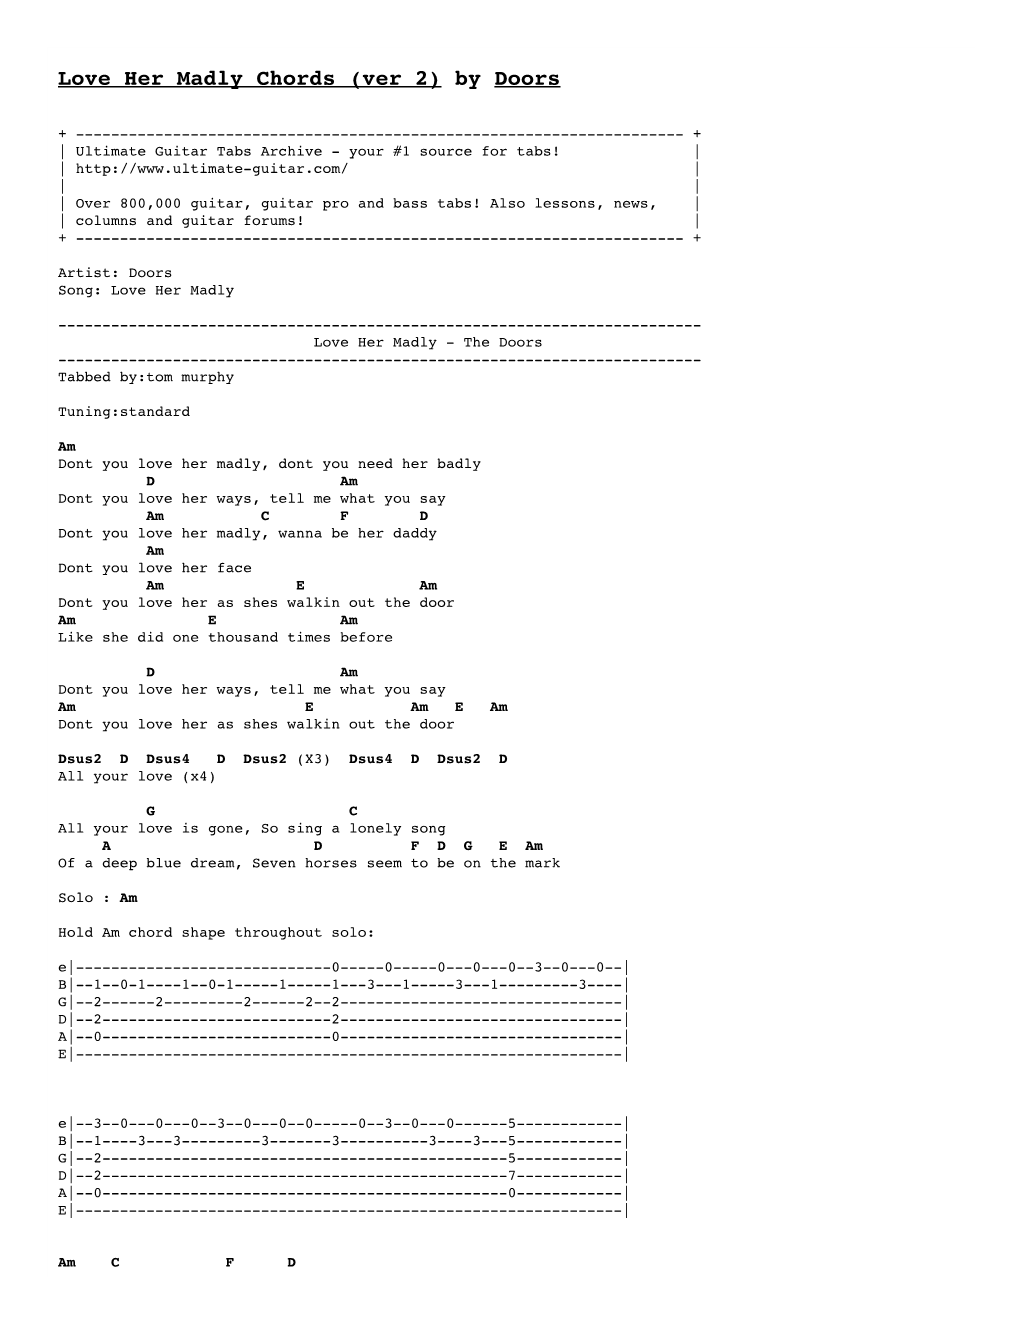 Love Her Madly Chords (Ver 2) by Doors Tabs @ Ultimate Guitar Archive